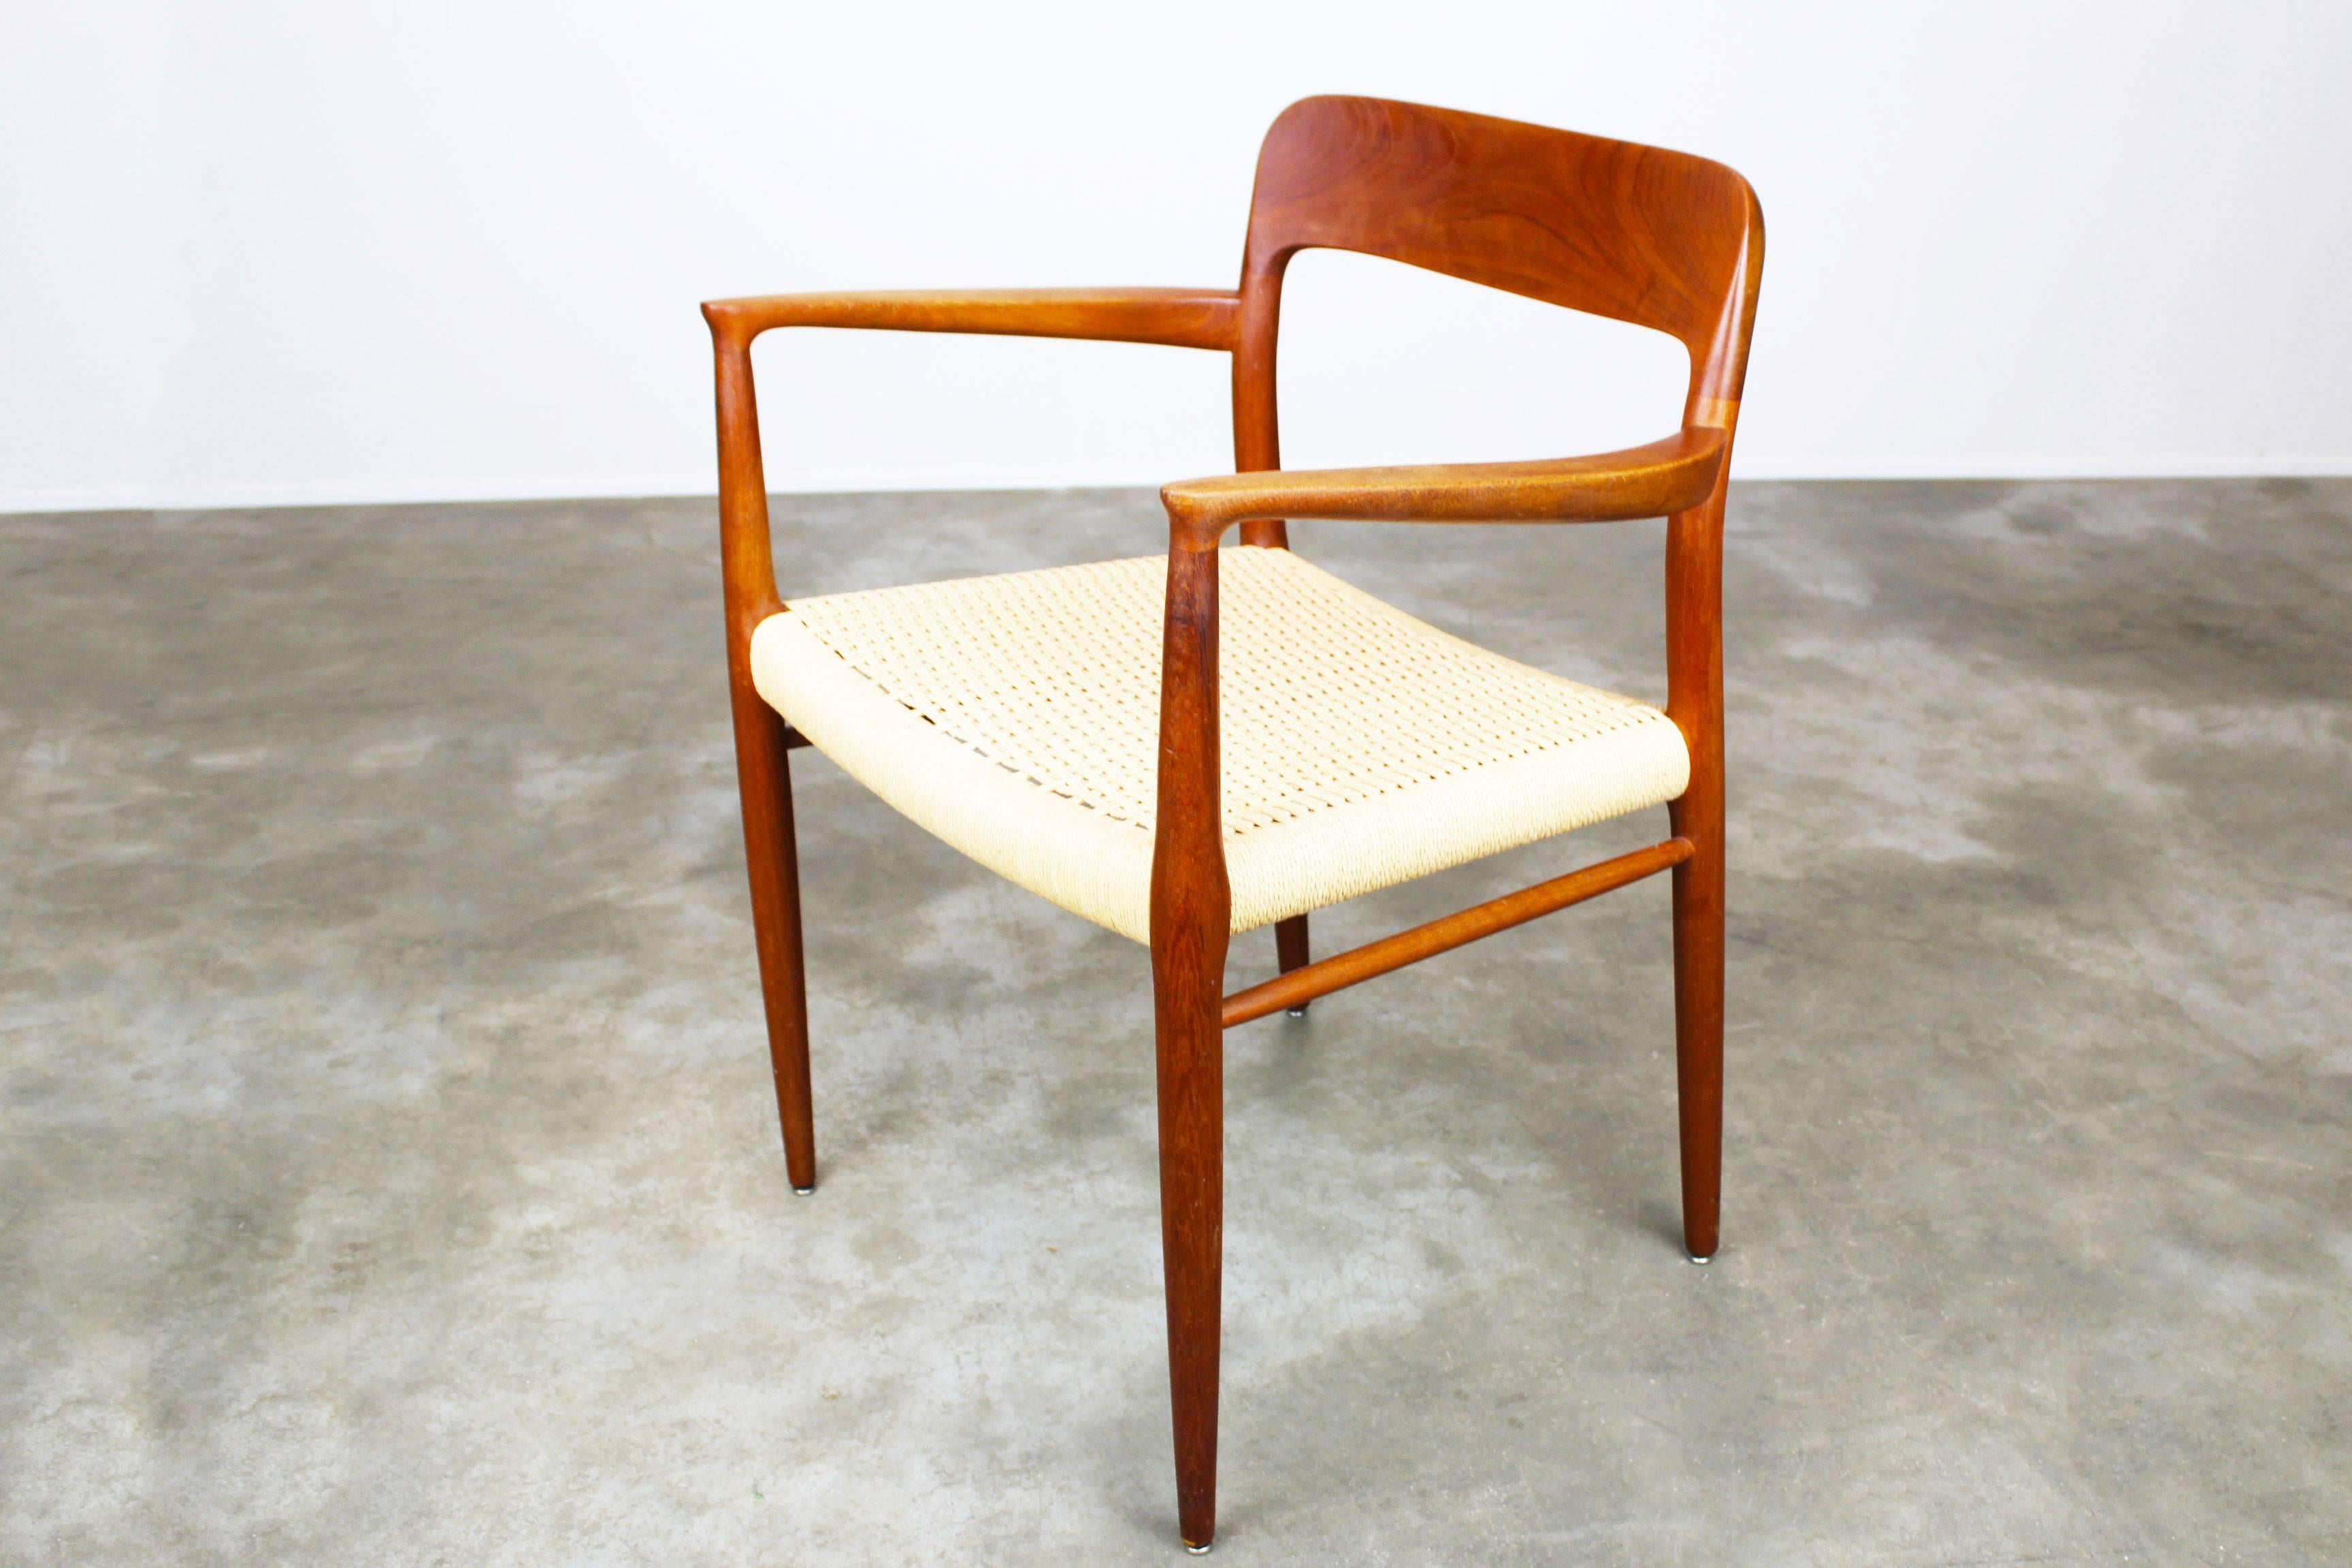 Model 56 armchair designed by Niels Otto Møller in the 1960
Wonderfull organic shaped frame in solid teak and stylish papercord seat 
Very comfortable chair, marked underneath.